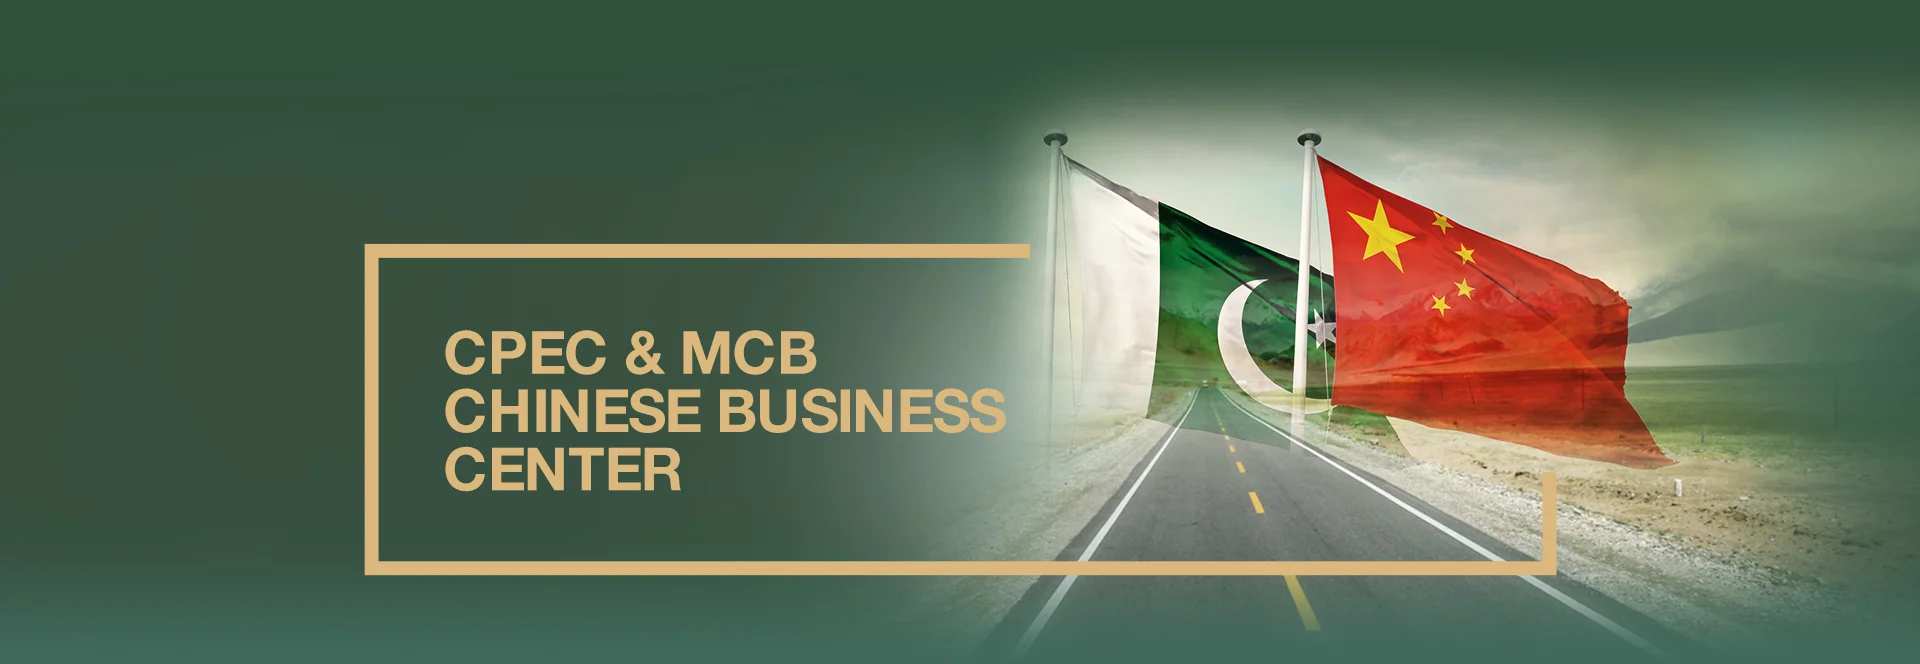 CPEC & MCB Chinese Business Center